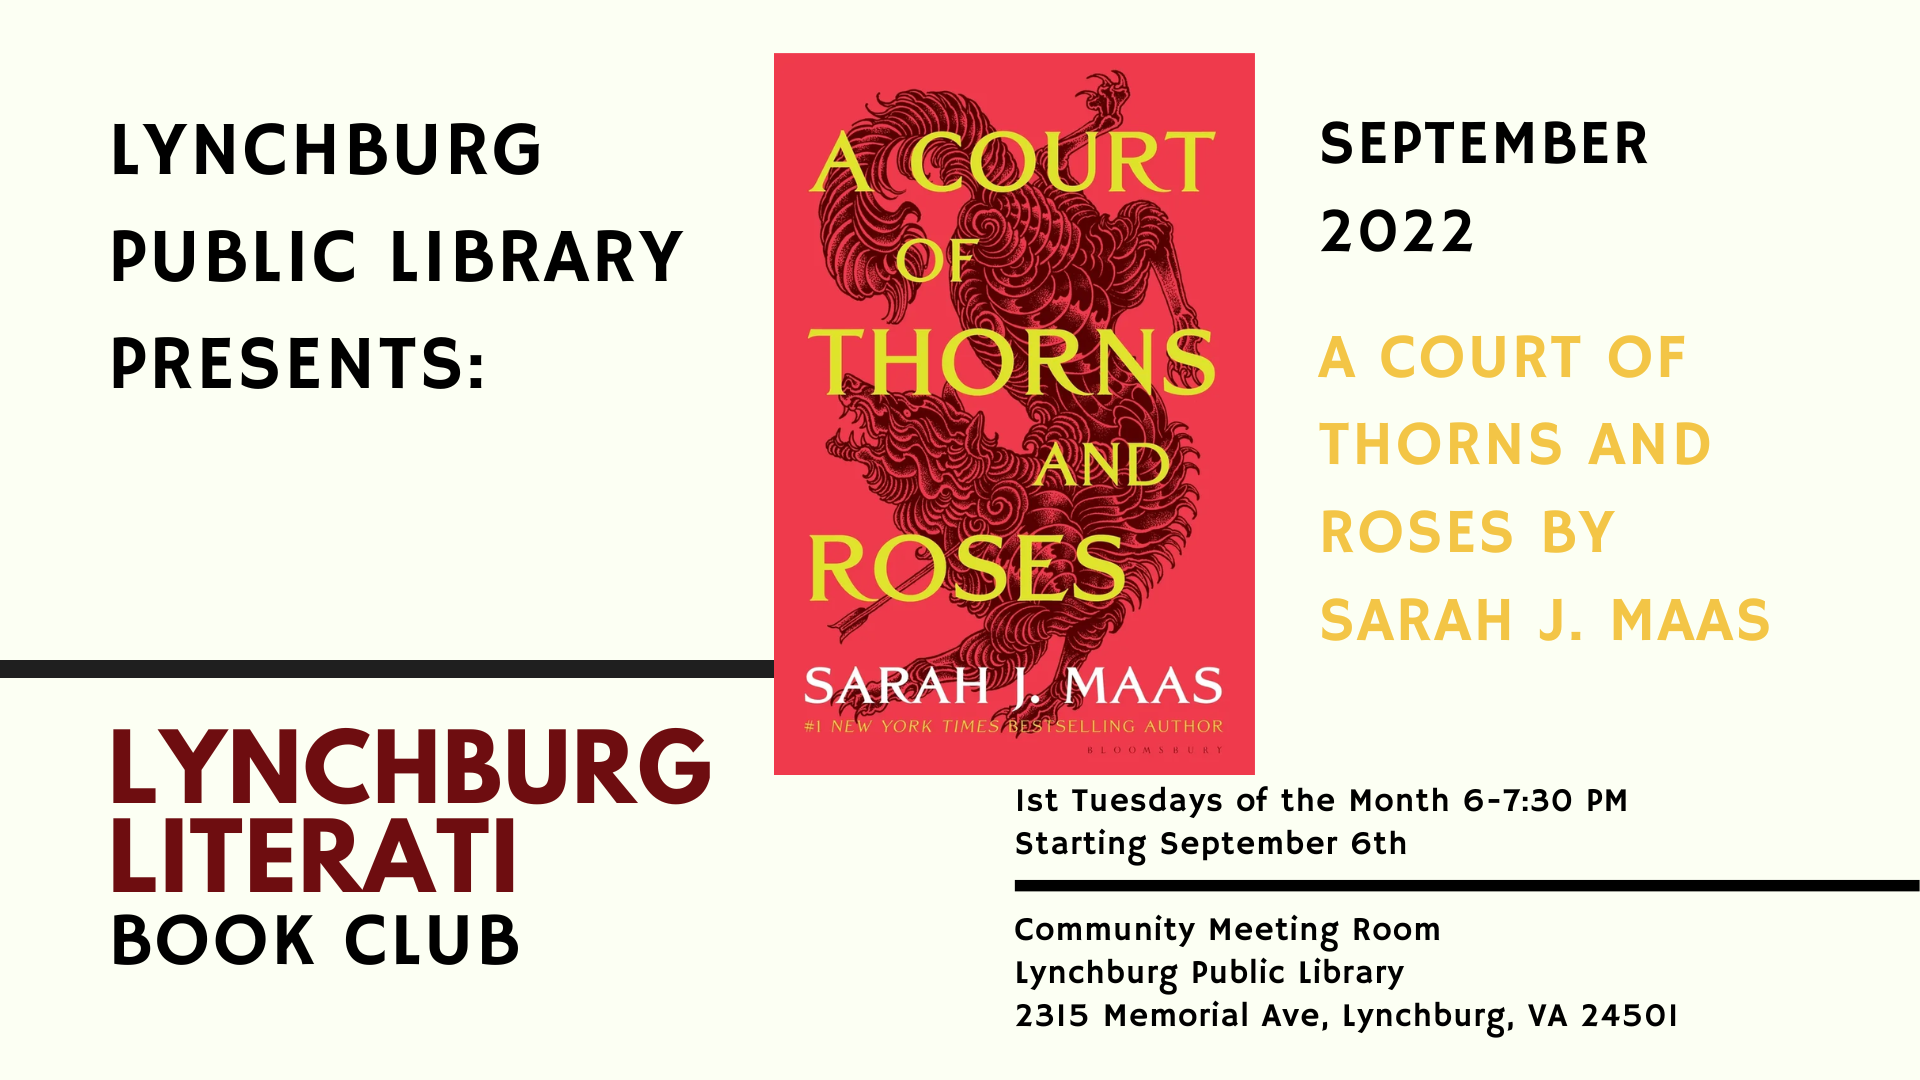 Lynchburg Public Library Presents: Lynchburg Literati Book Club; September 2022: A Court of Thorns and Roses by Sarah J. Maas; 1st Tuesdays of the month 6-7:30 pm starting September 6th; Community Meeting Room, Lynchburg Public Library, 2315 Memorial Ave